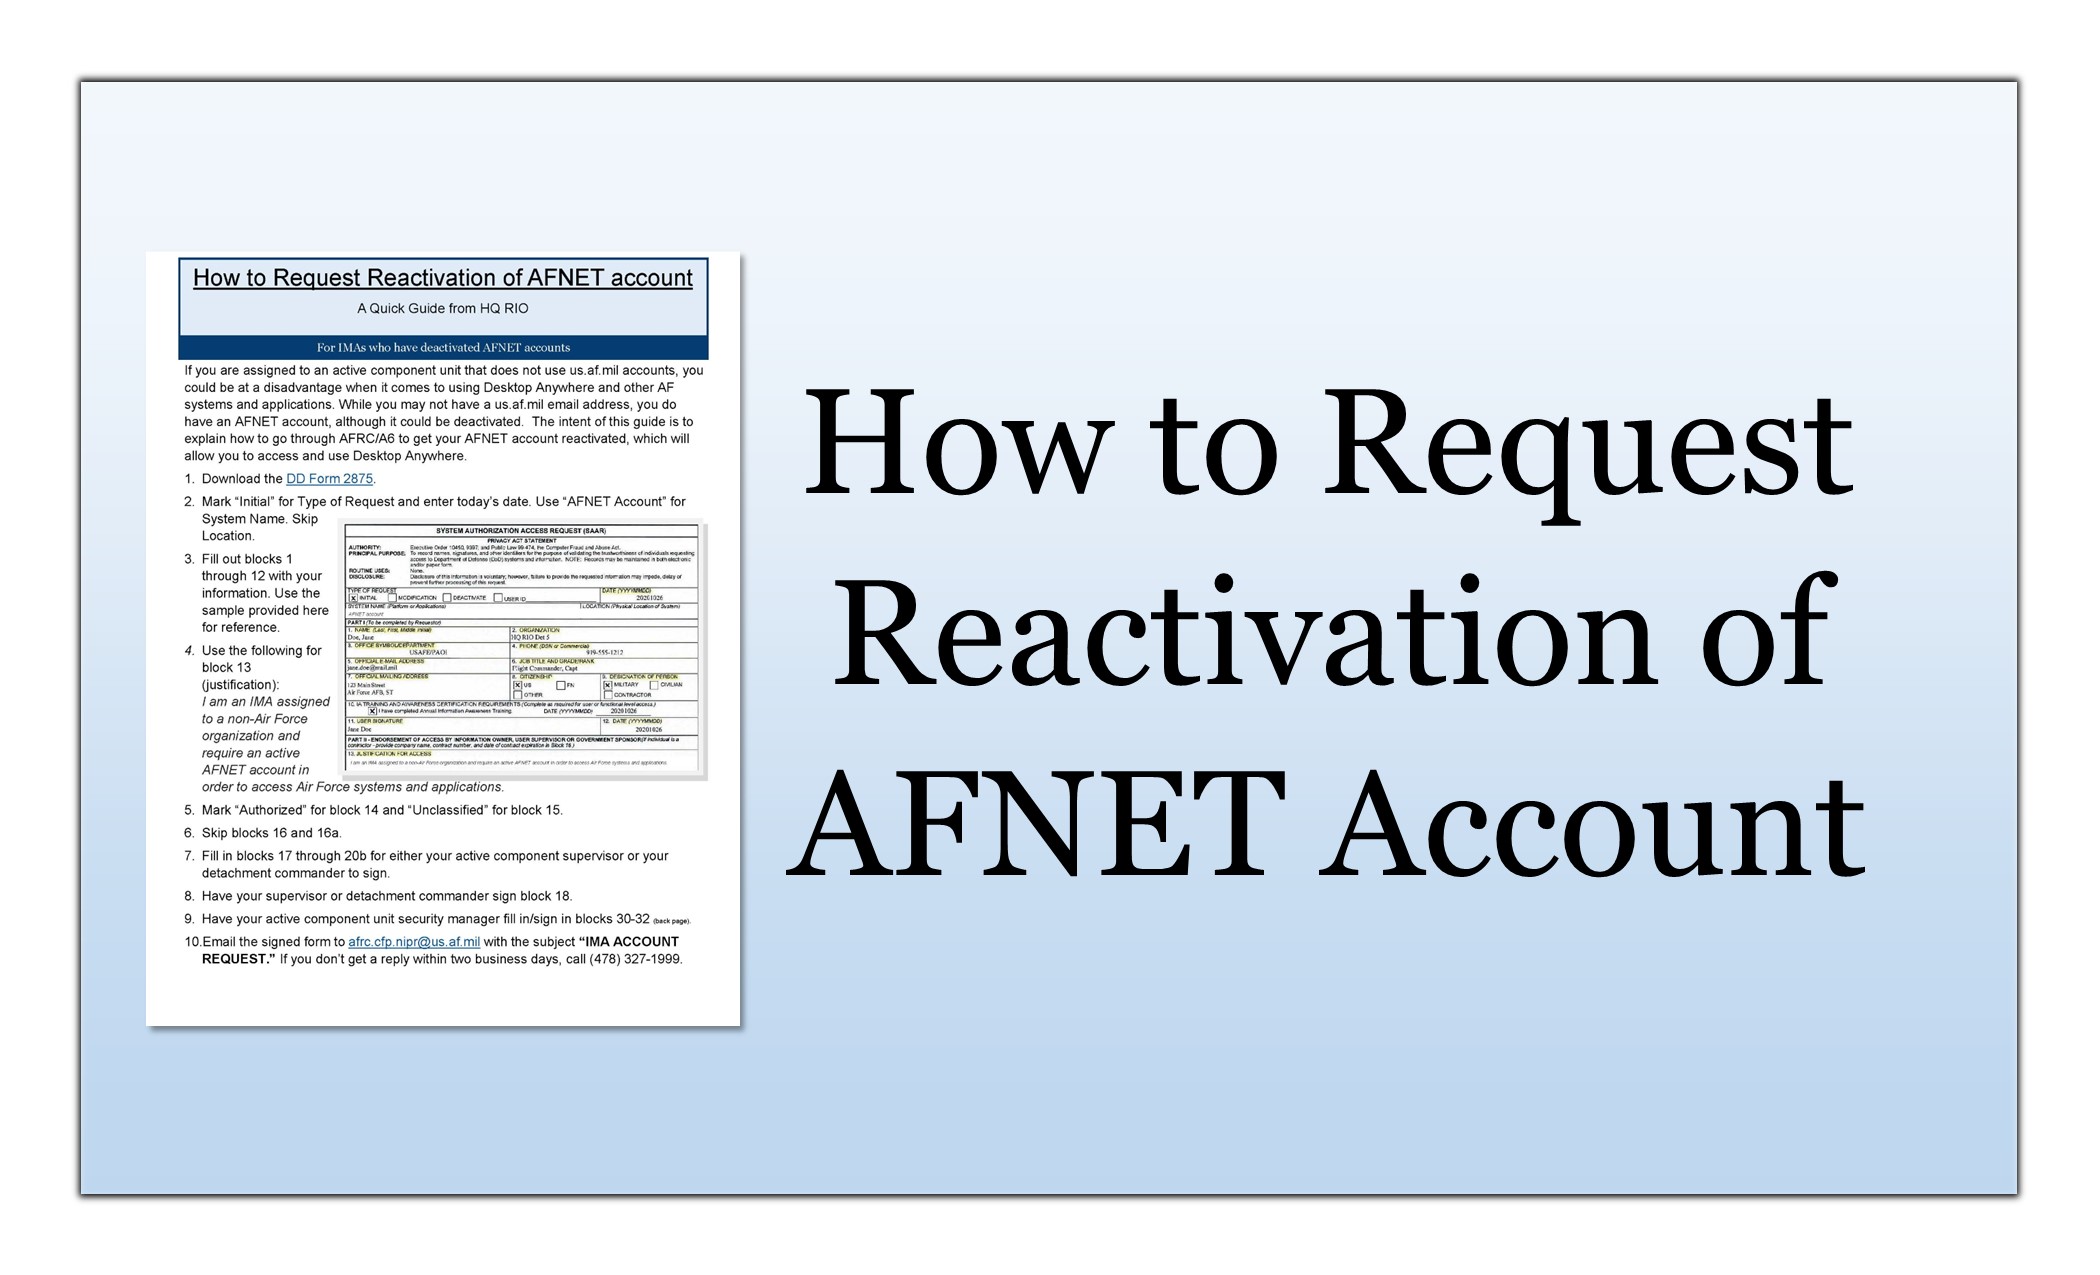 How to request reactivation of AFNET account thumbnail link